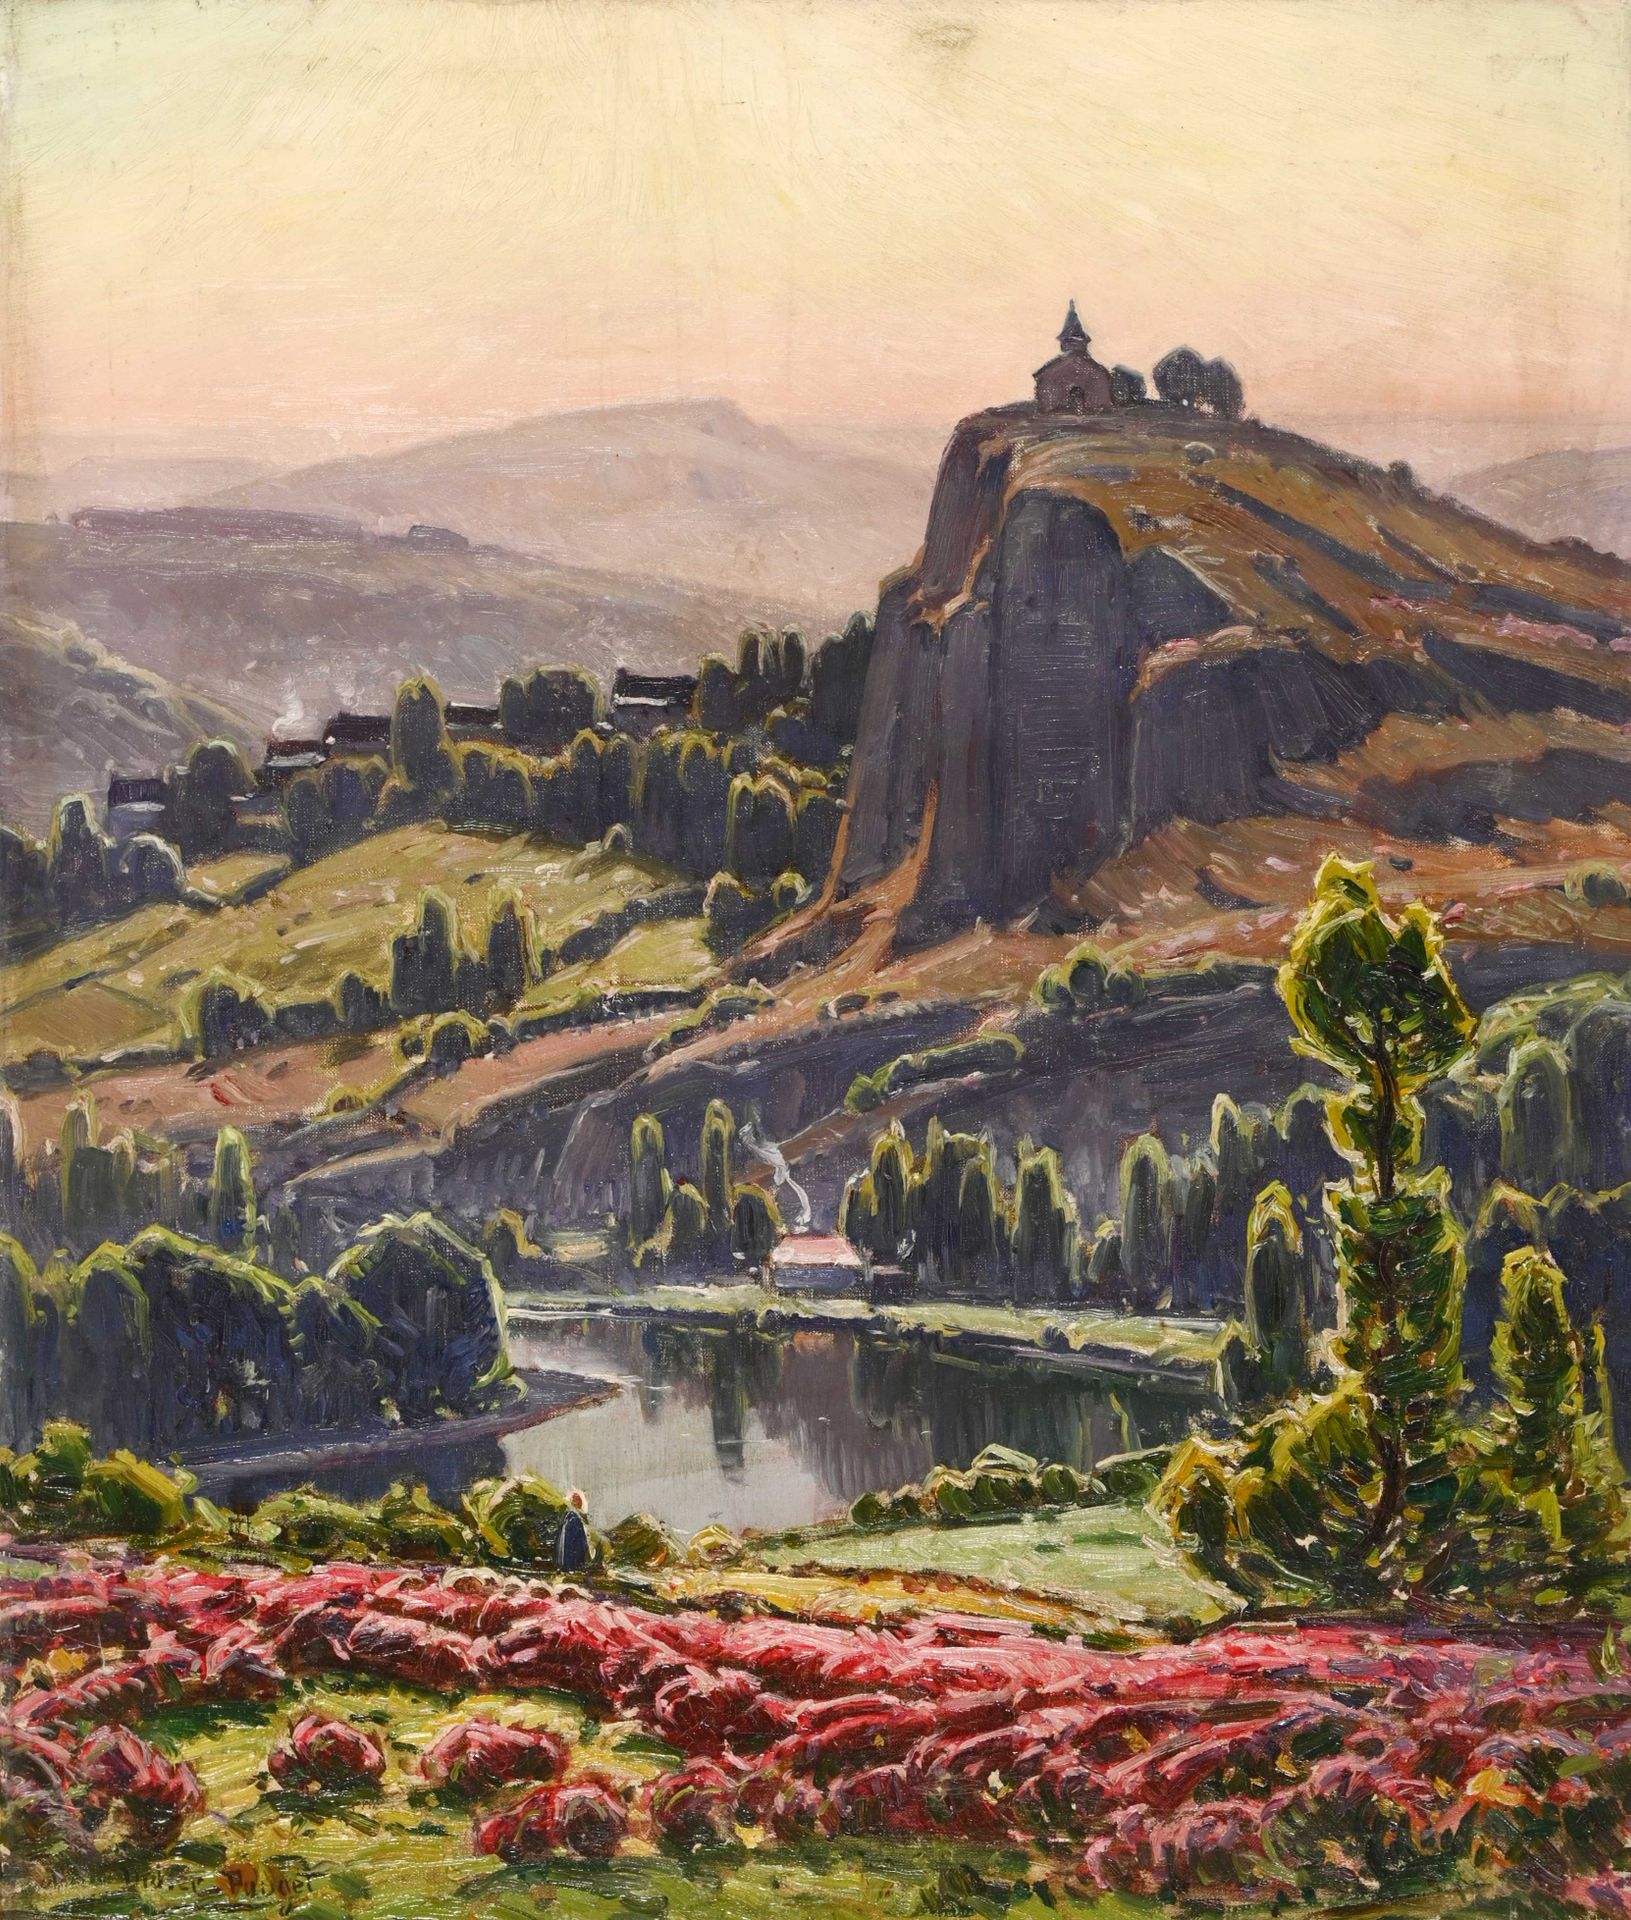 Null William DIDIER-POUGET (1864-1959)《阿韦龙谷》hst sbg 55x45